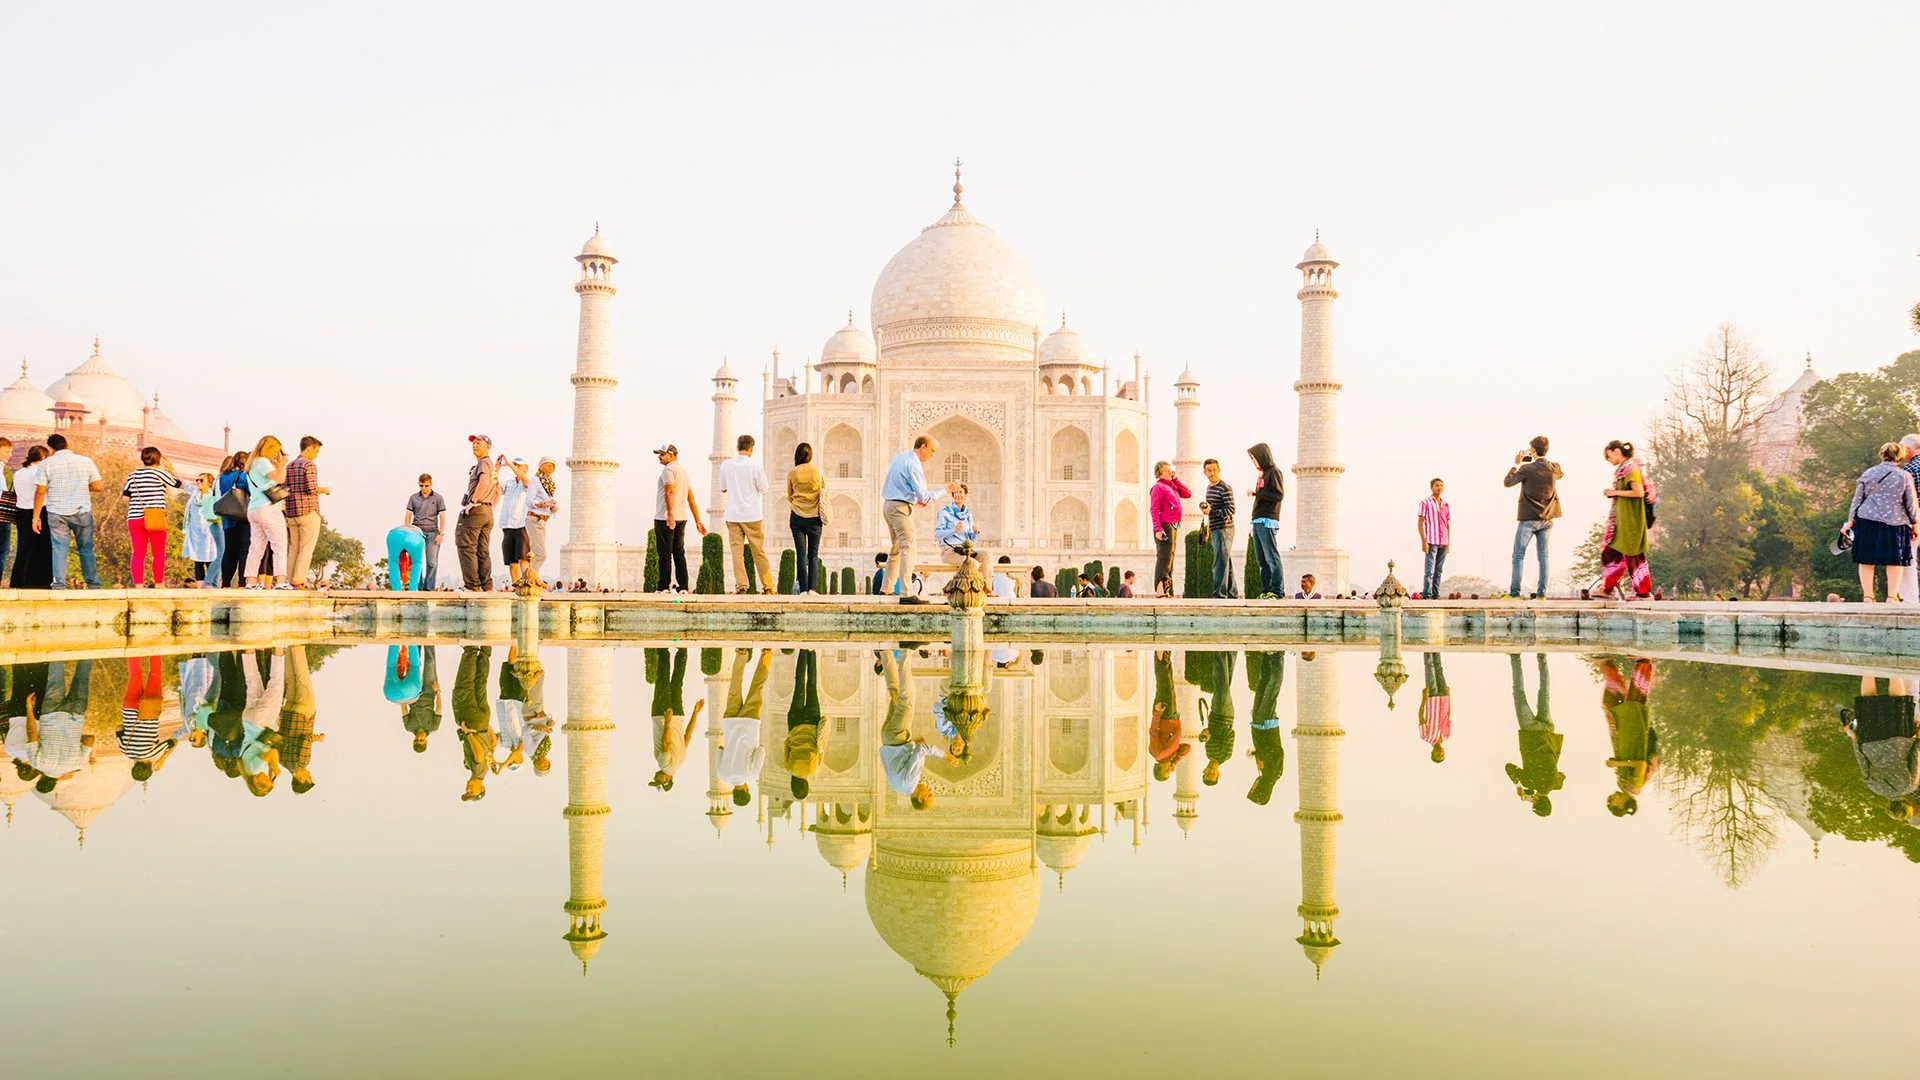 Agra Wonders and Monuments of the Mughal Legacy